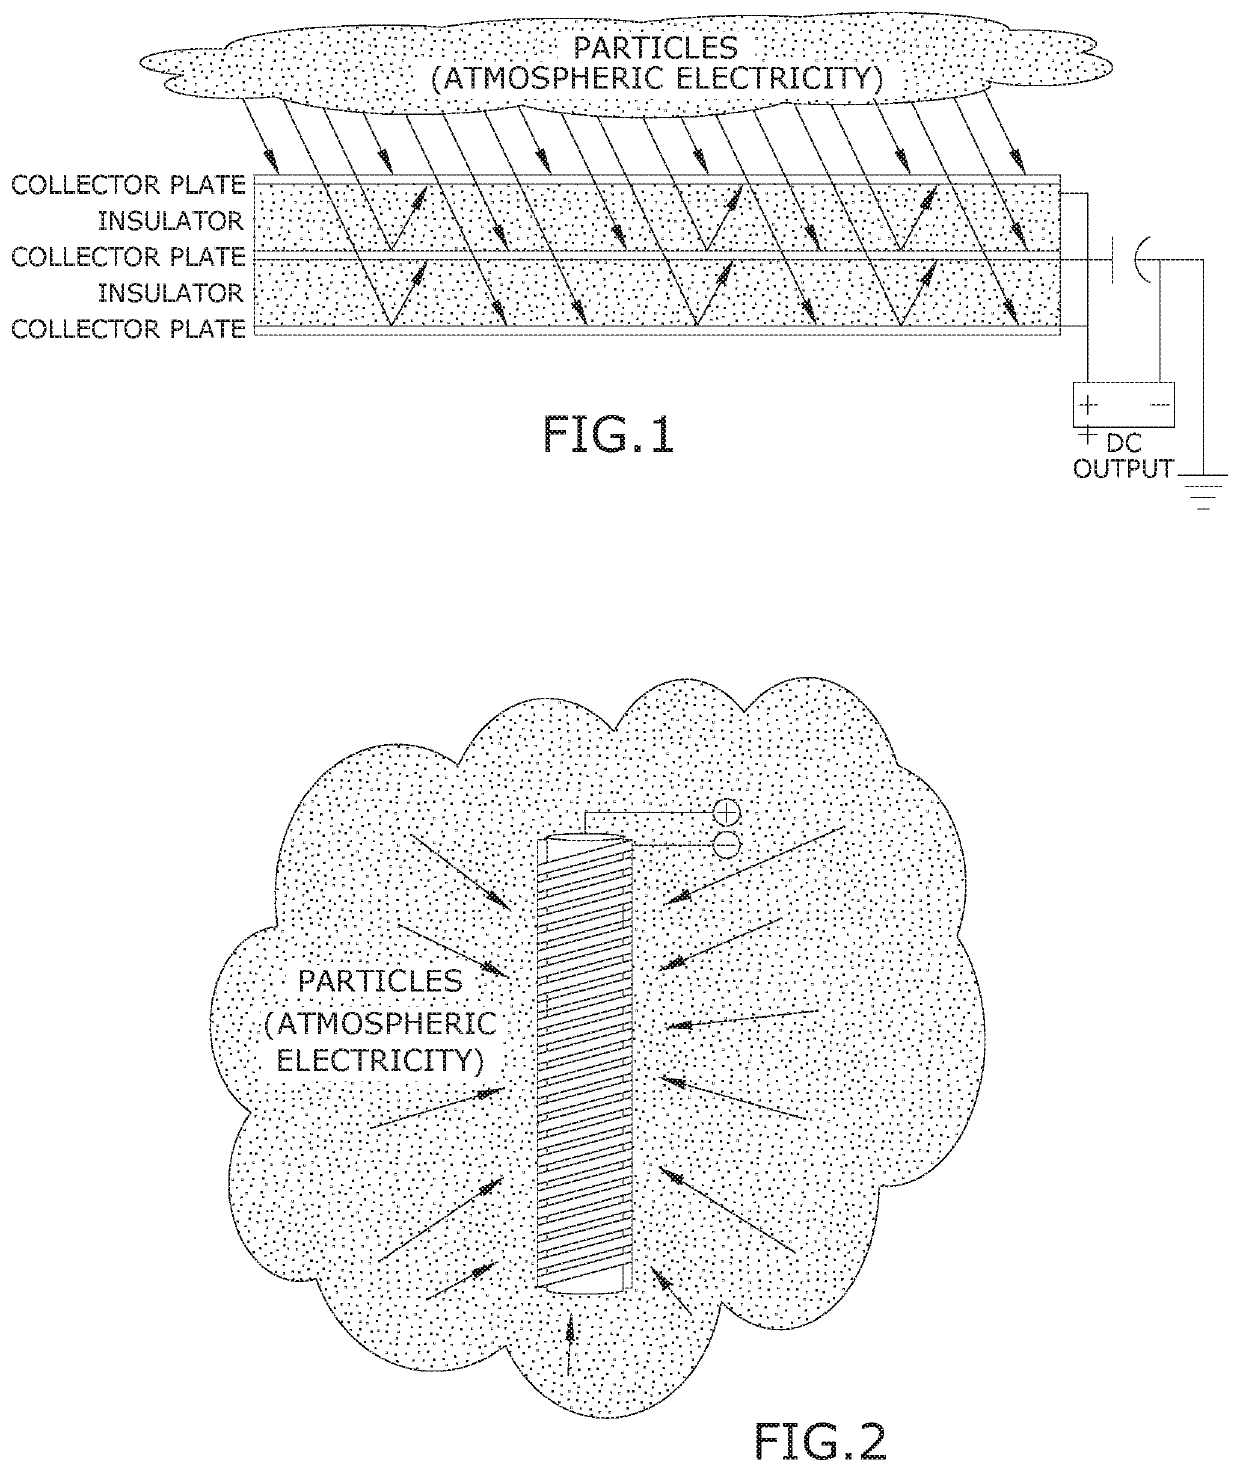 Methods and devices for harvesting ionic energy to produce electricity